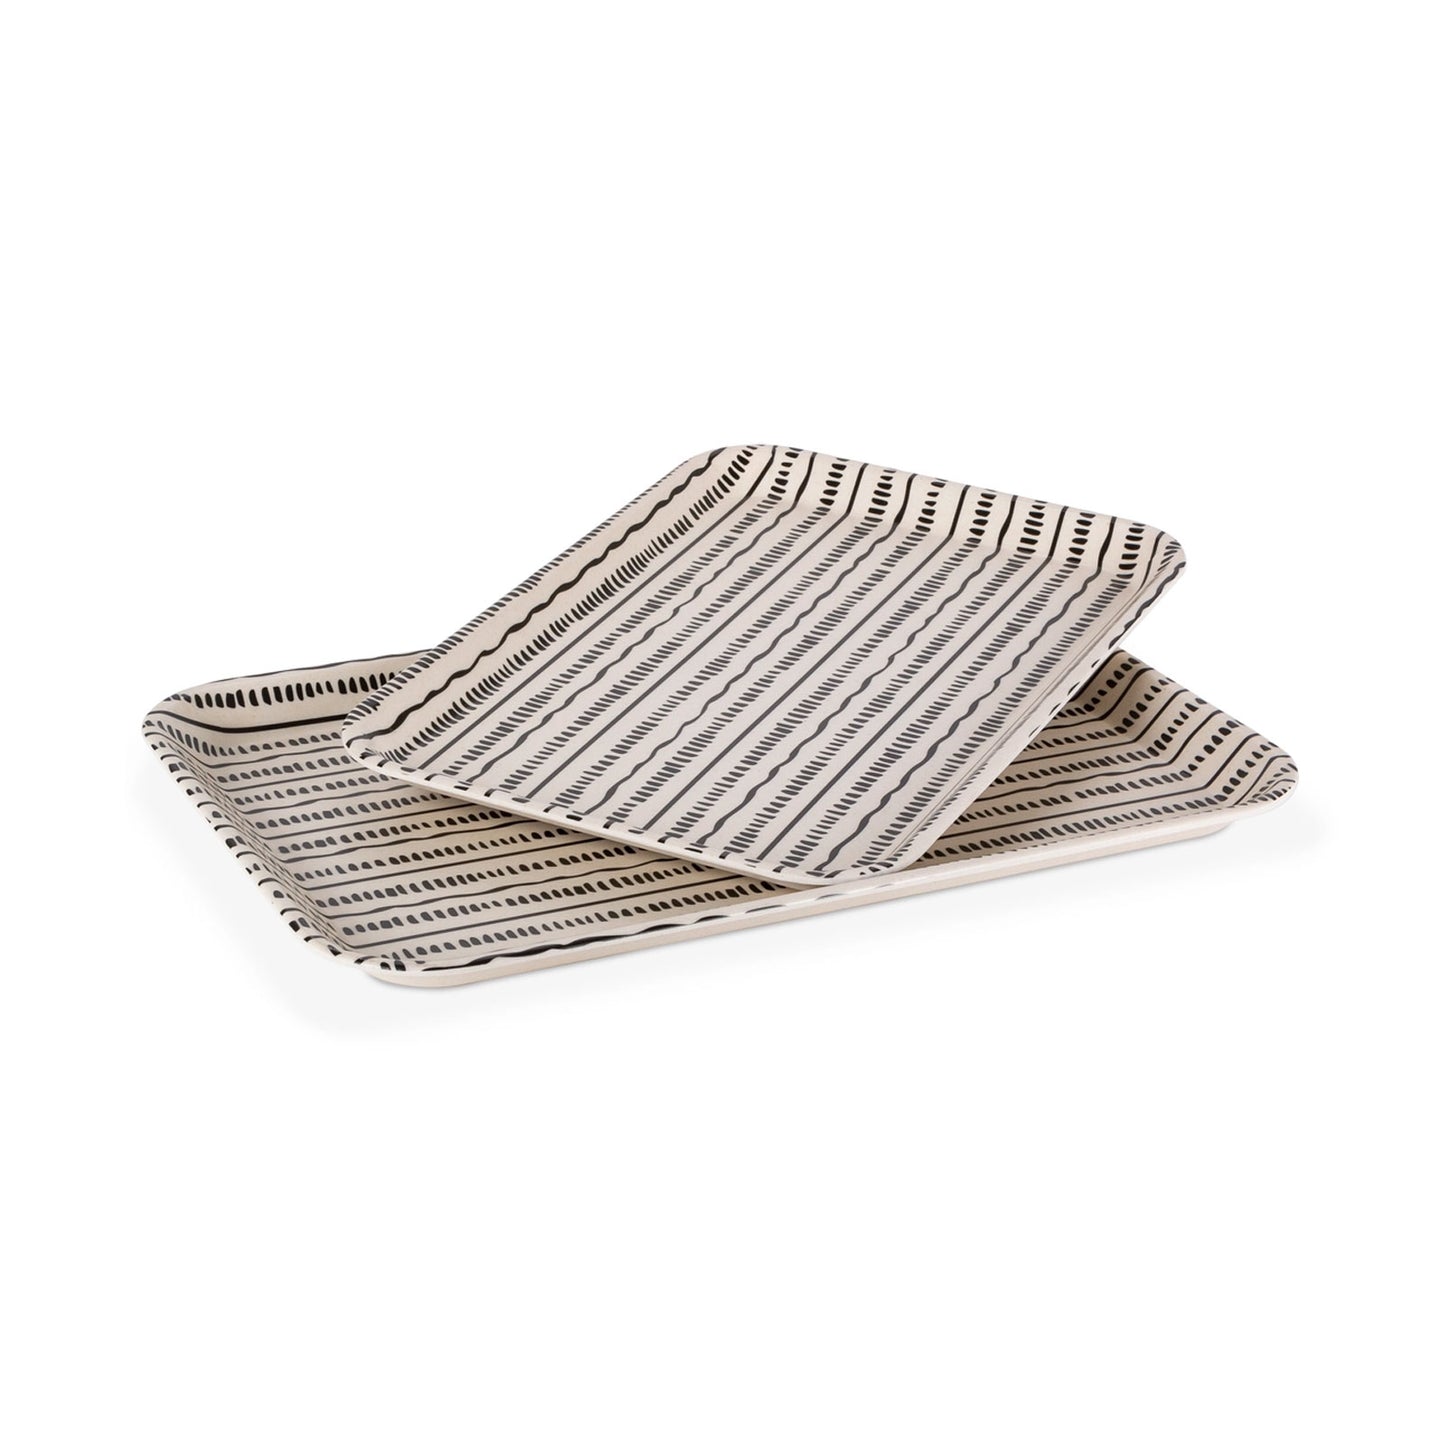 Dashed line Trays, Set of 2